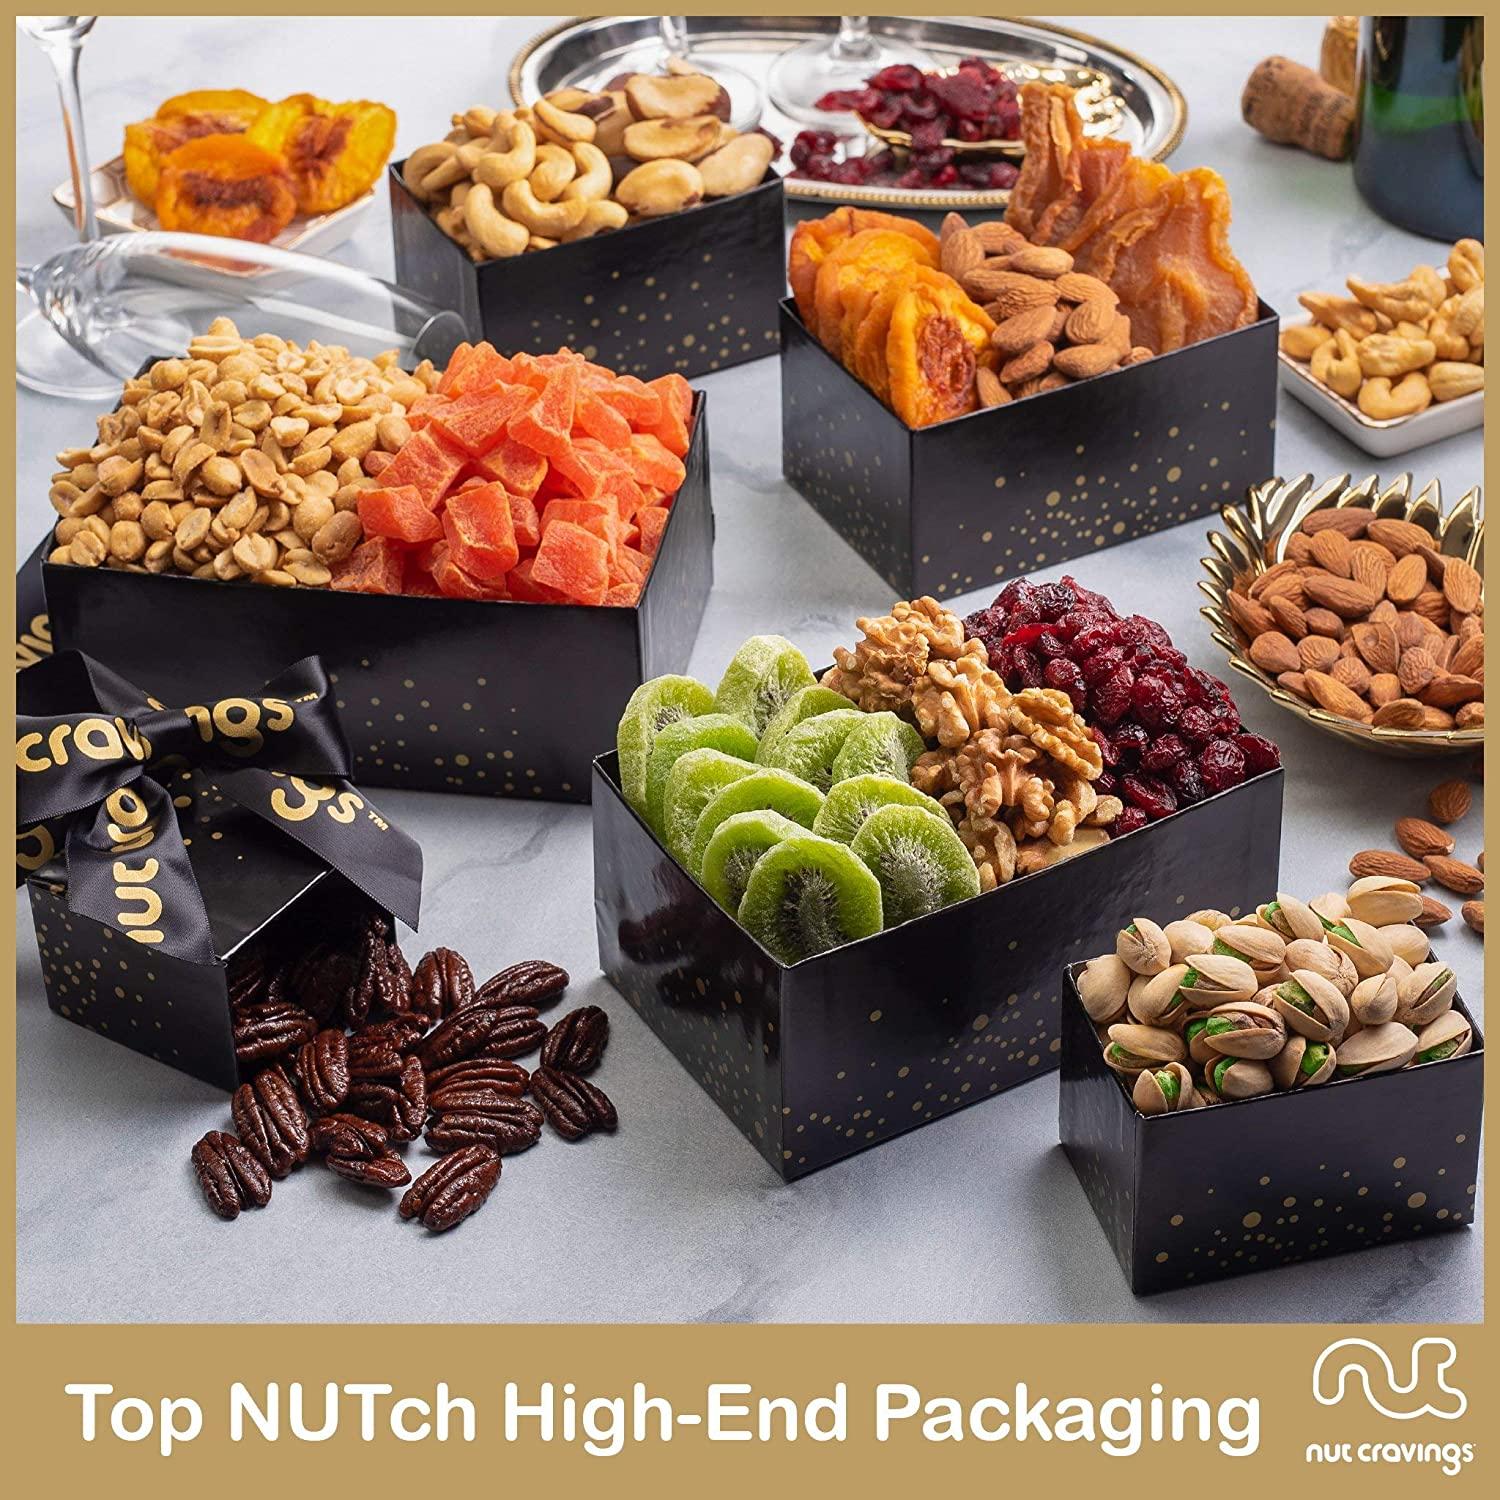 Classic Chocolate Fruit & Nut Gift Box – Stackhouse Orchards